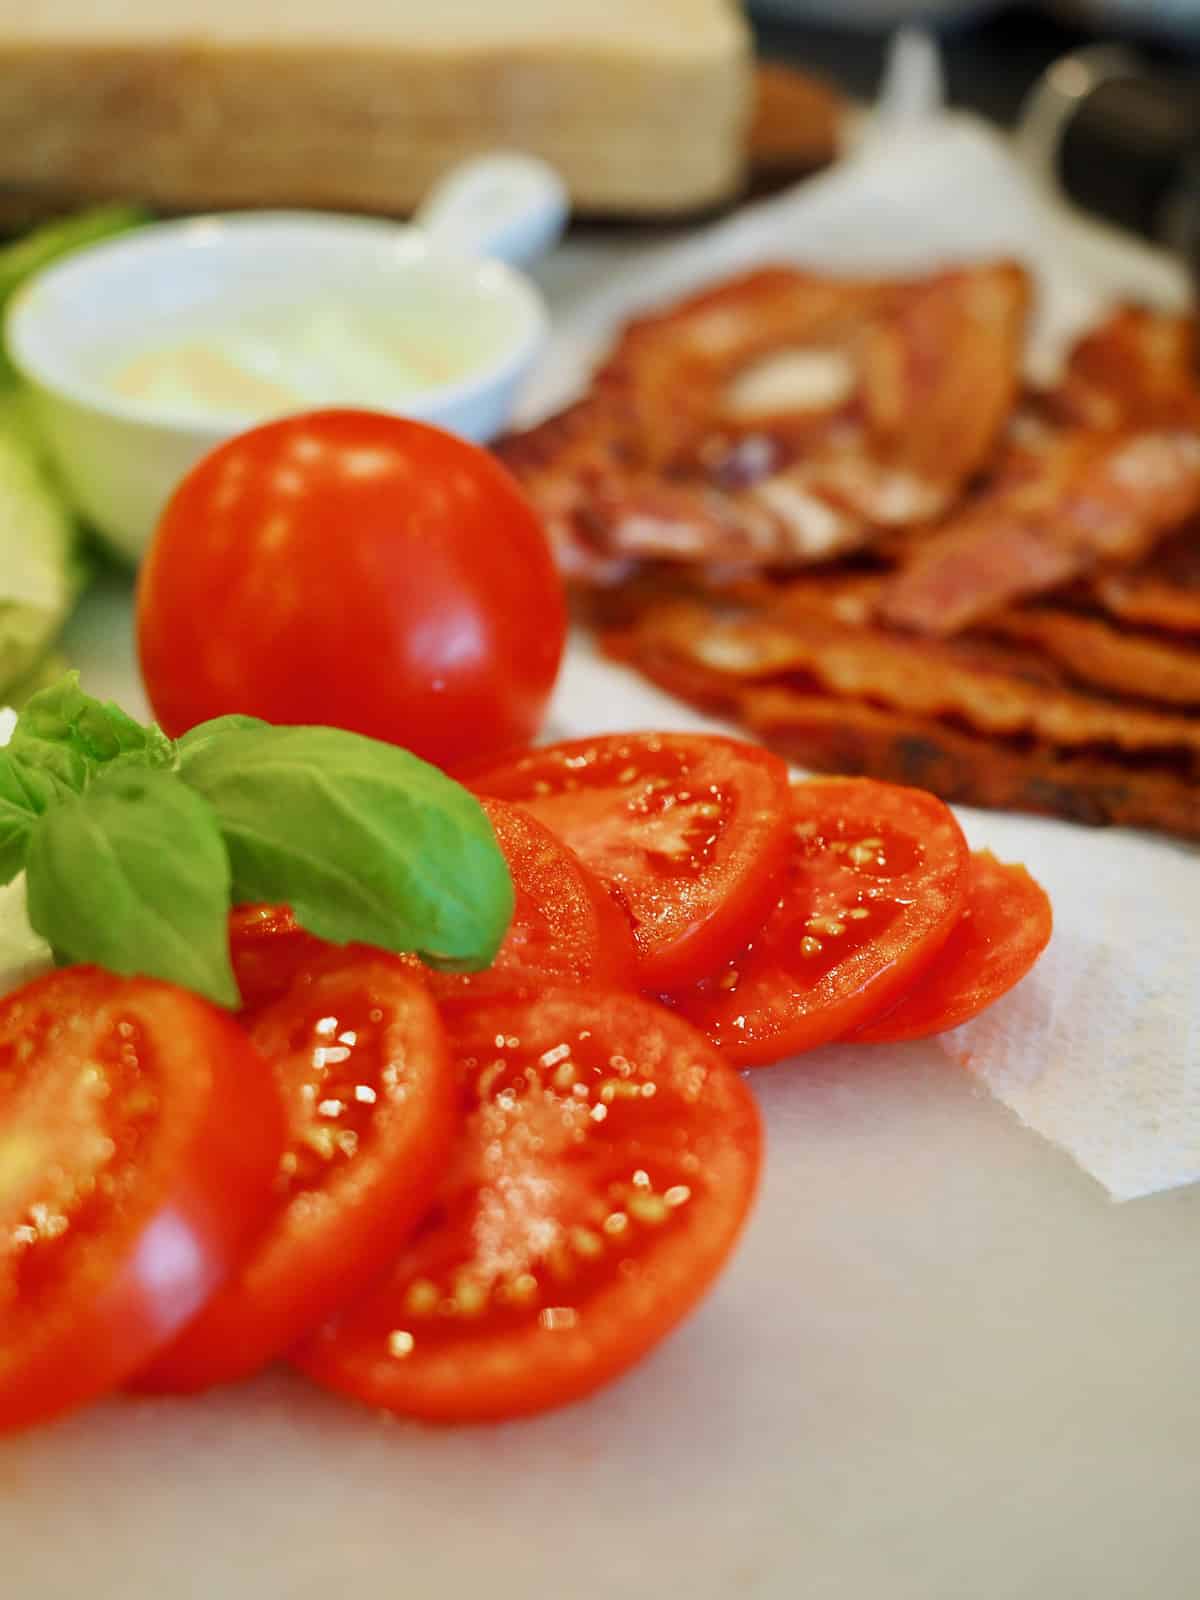 Sliced juicy tomatoes on a cutting board, with a whole tomato behind, fresh basil leaves and in the background crisp bacon and a small white bowl of mayonnaise.